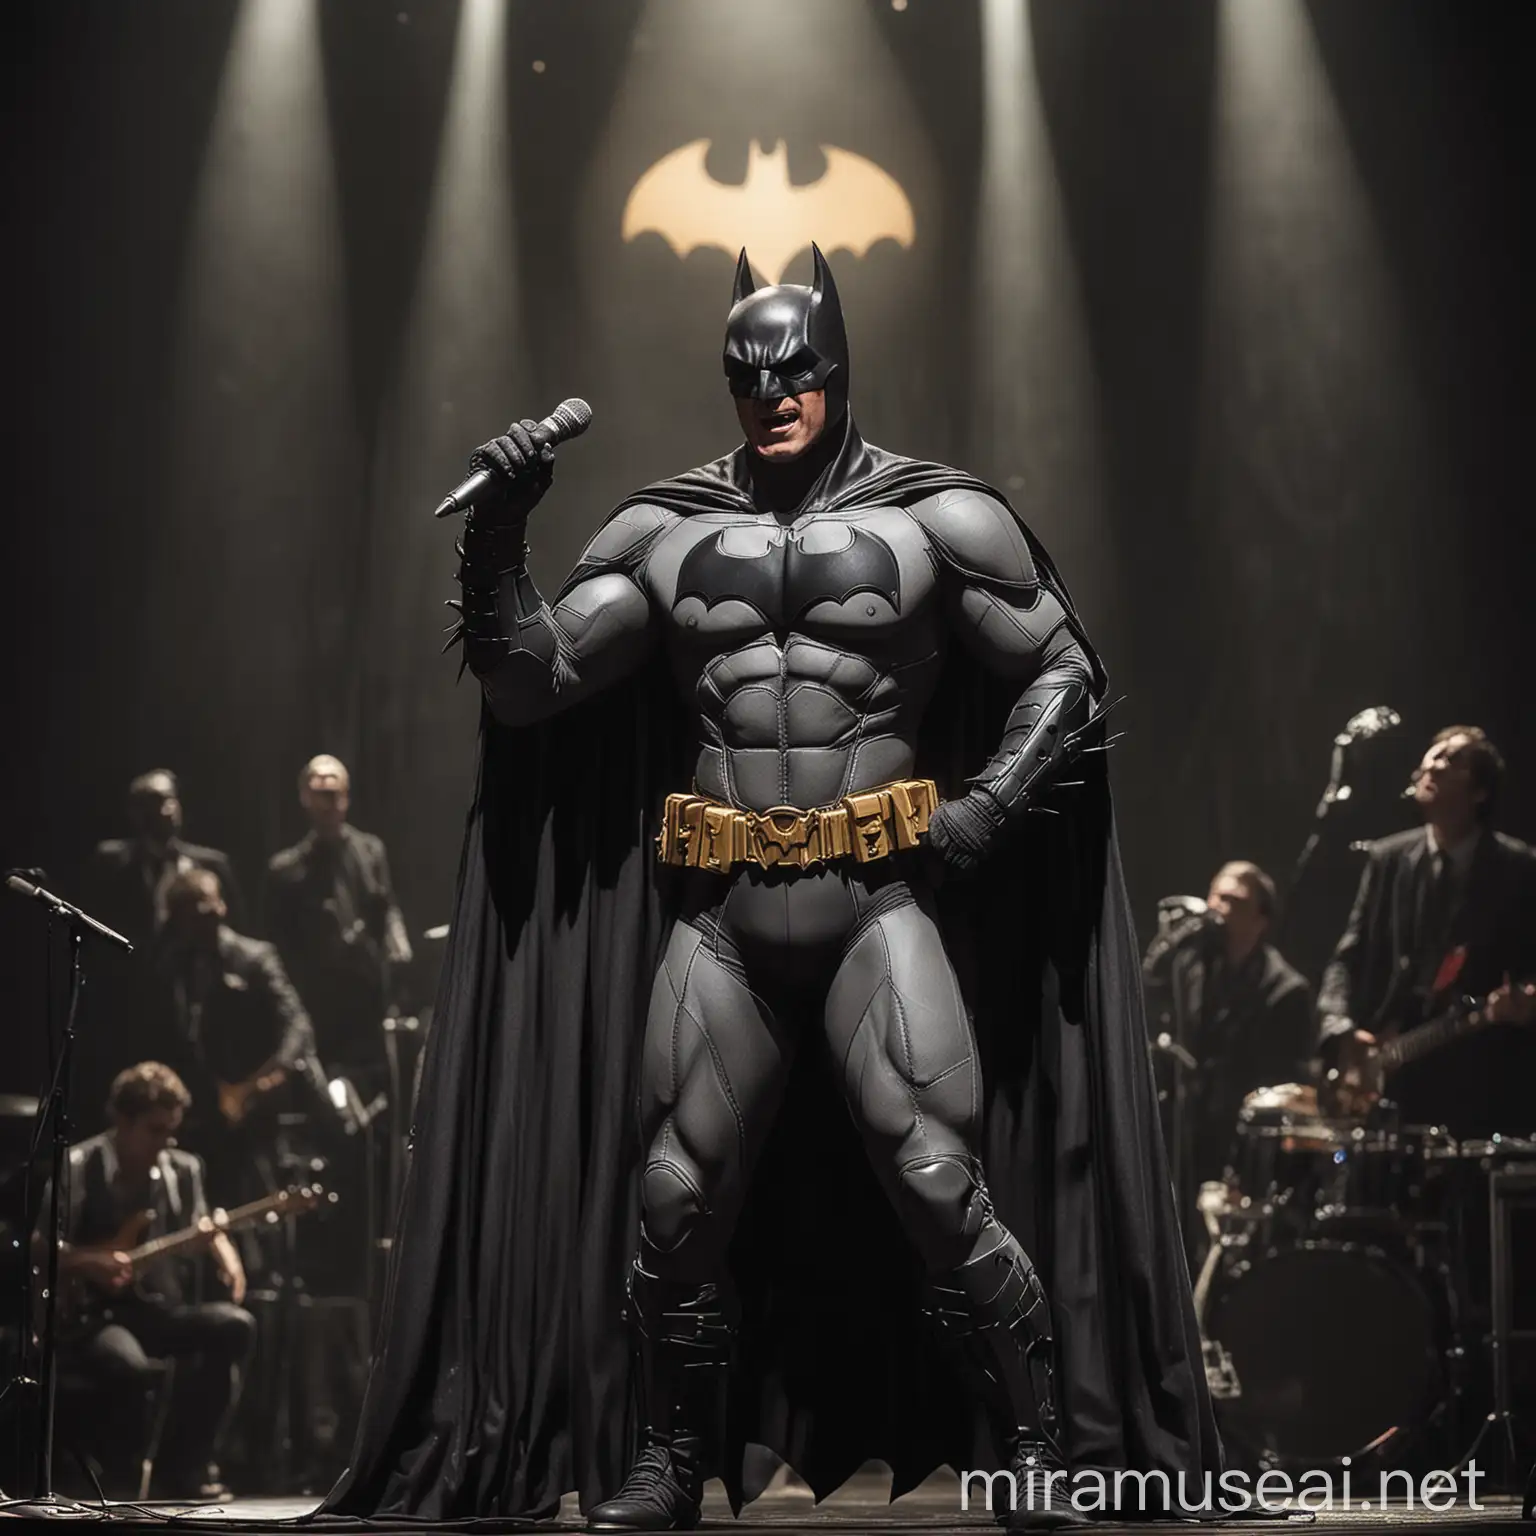 batman singing song in stage with mike one person
